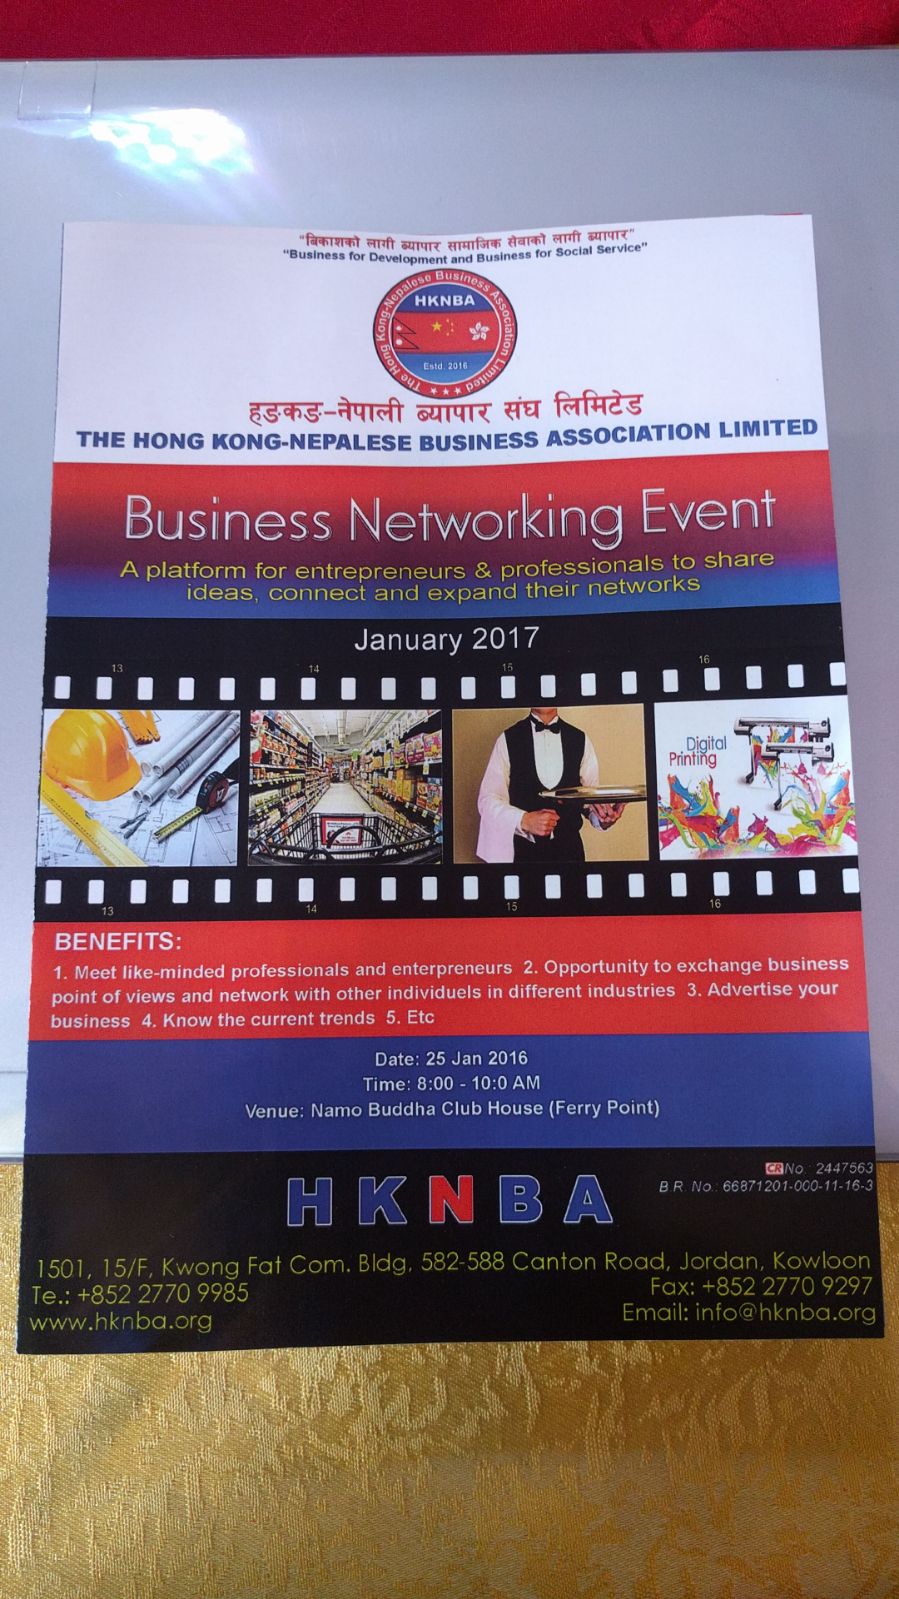 Official Launch of HKNBA Website, Facebook and Business Networking Event